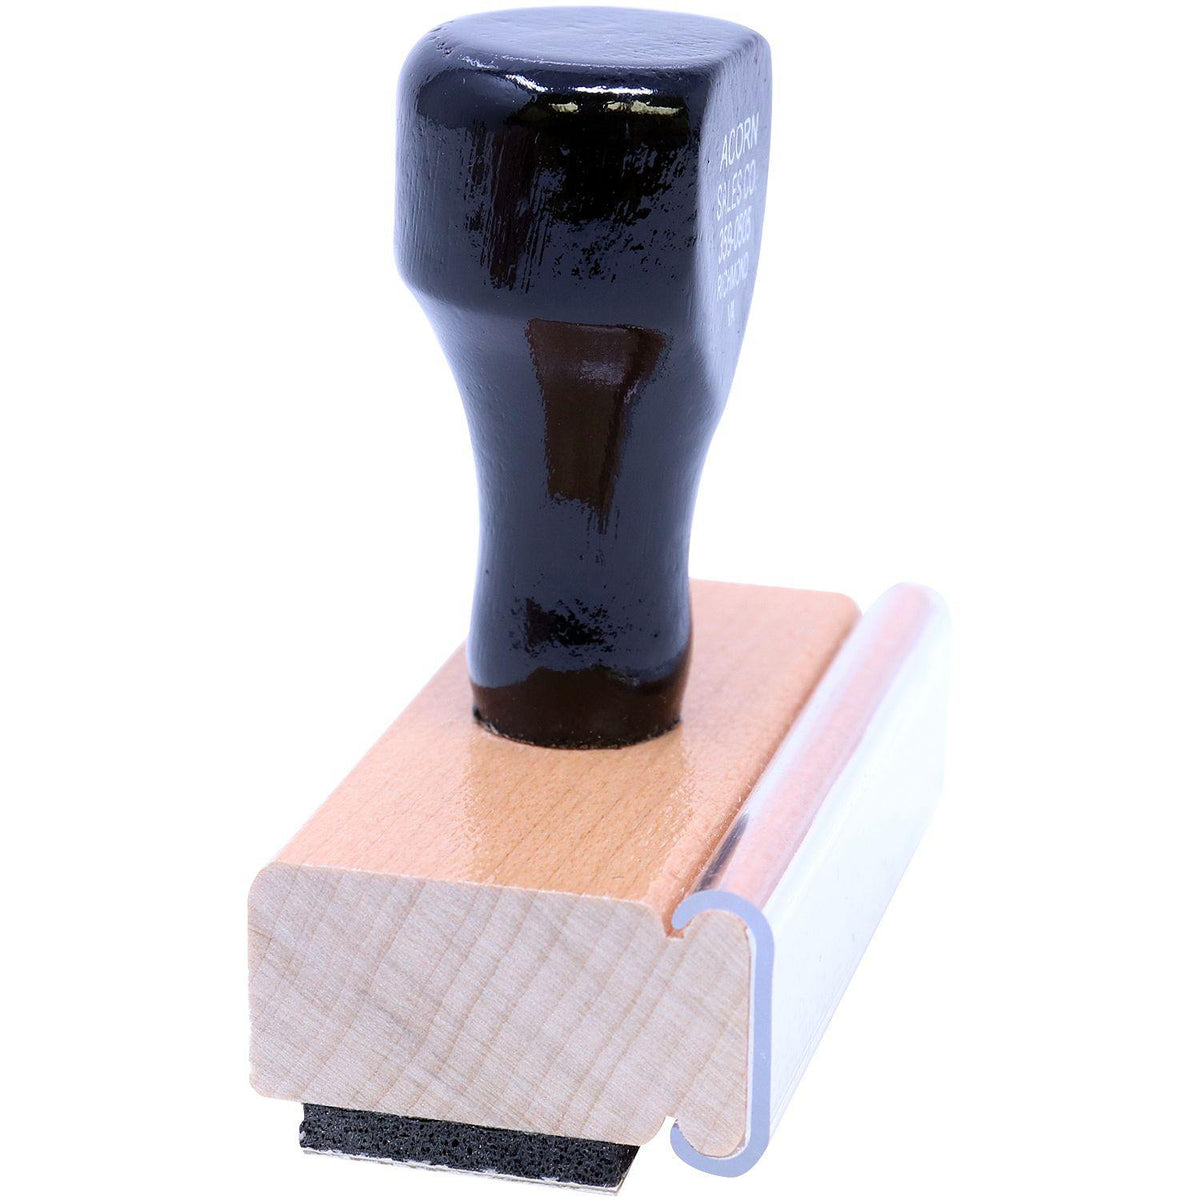 Side View of Large Posted with Date Box Rubber Stamp at an Angle